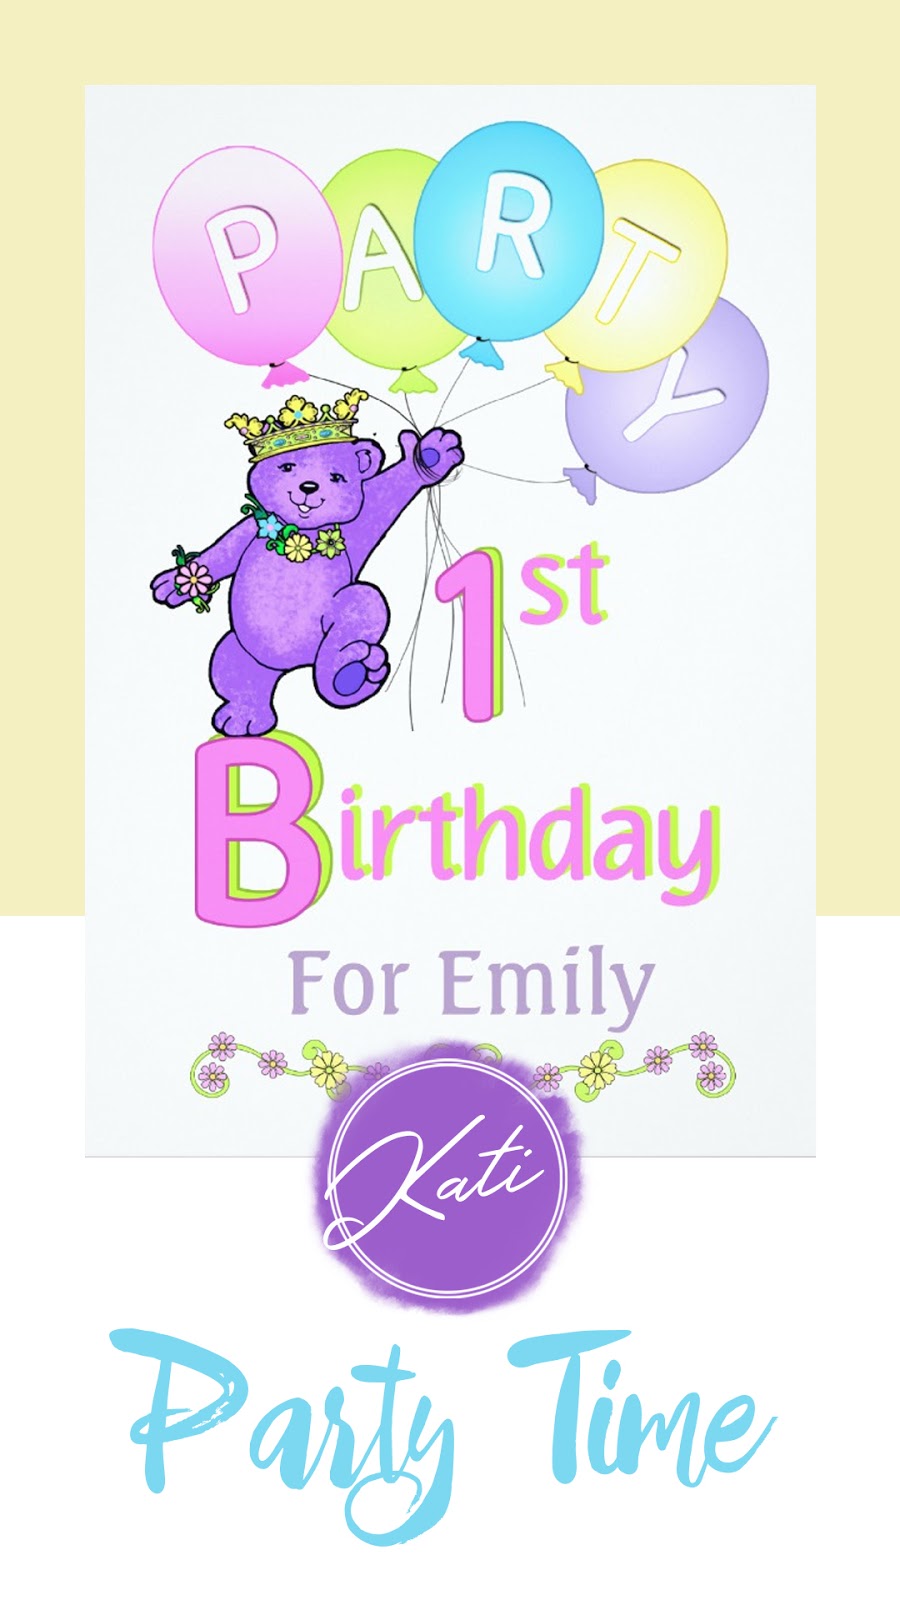 Purple bear and balloons first birthday party collection. Featuring personalized invitations, cards, bags, gifts, and party decor. In a confetti pink, sweetness yellow, cotton candy blue, and playful purple color palette.